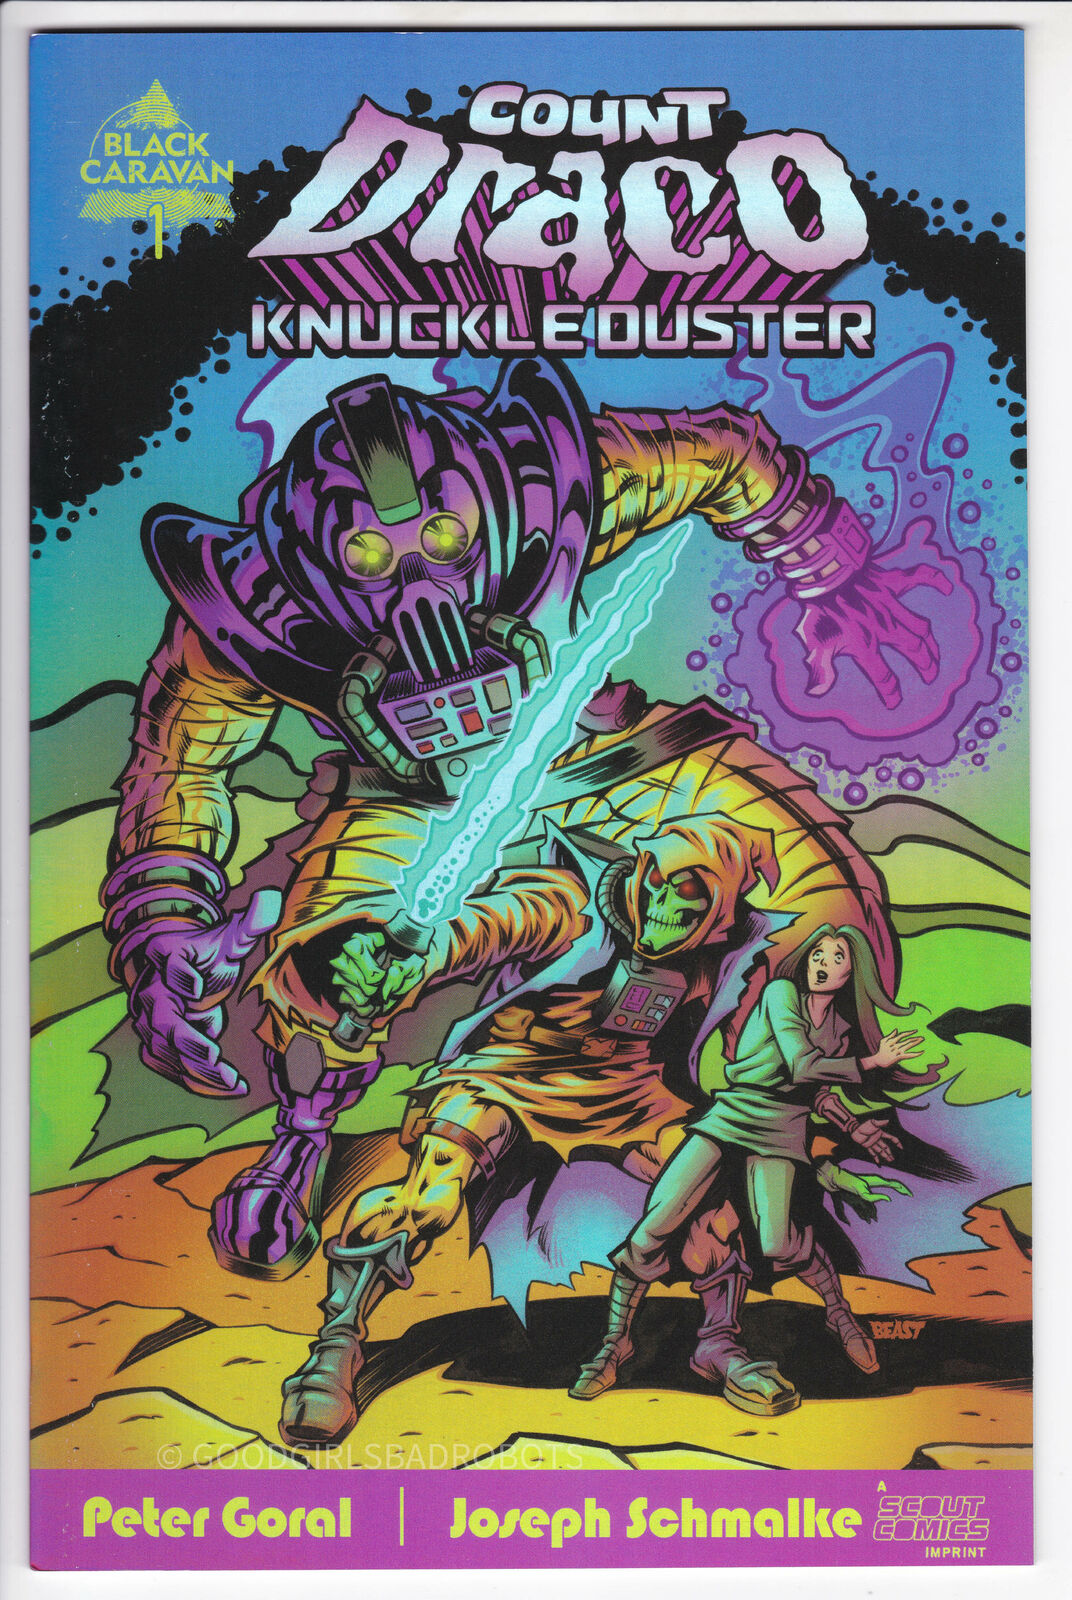 COUNT DRACO KNUCKLEDUSTER #1 EXCLUSIVE VERY RARE HOLO FOIL VARIANT AMAZING